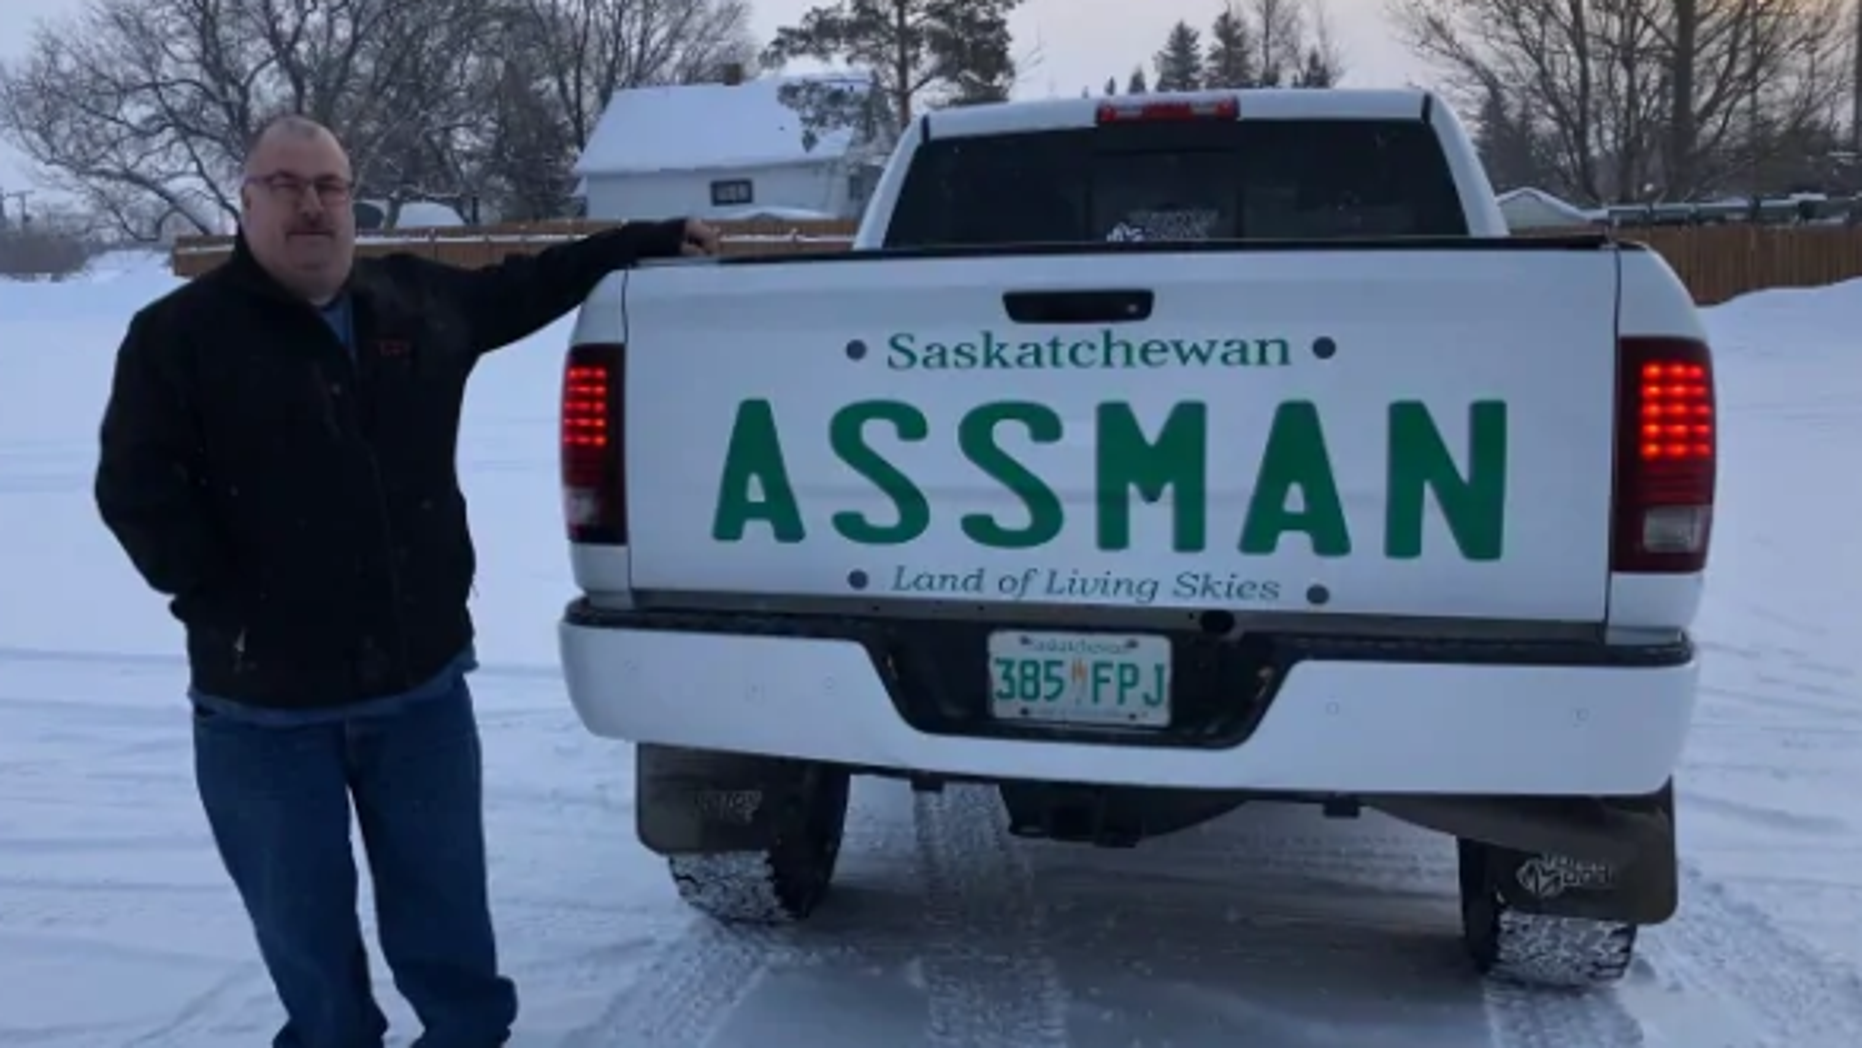 David Assman standing next to his pickup truck with a decal bearing his last name.